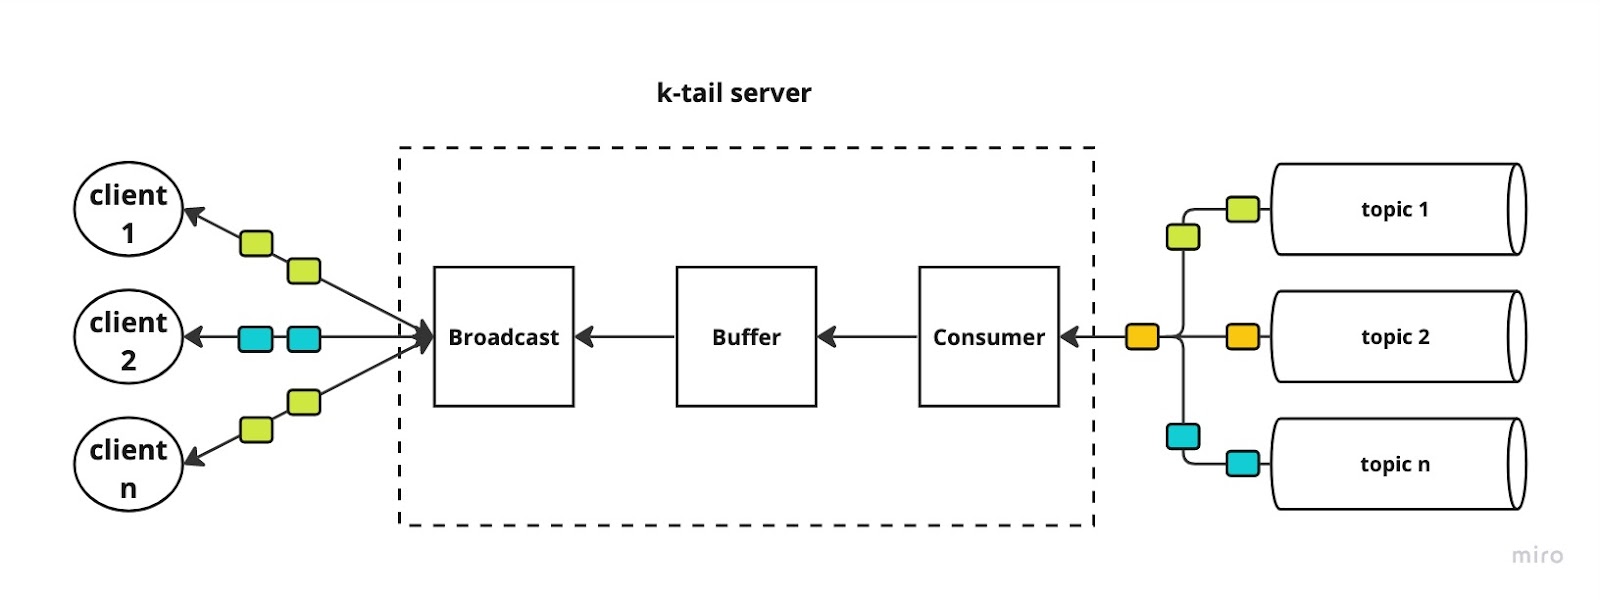 k-tail overview